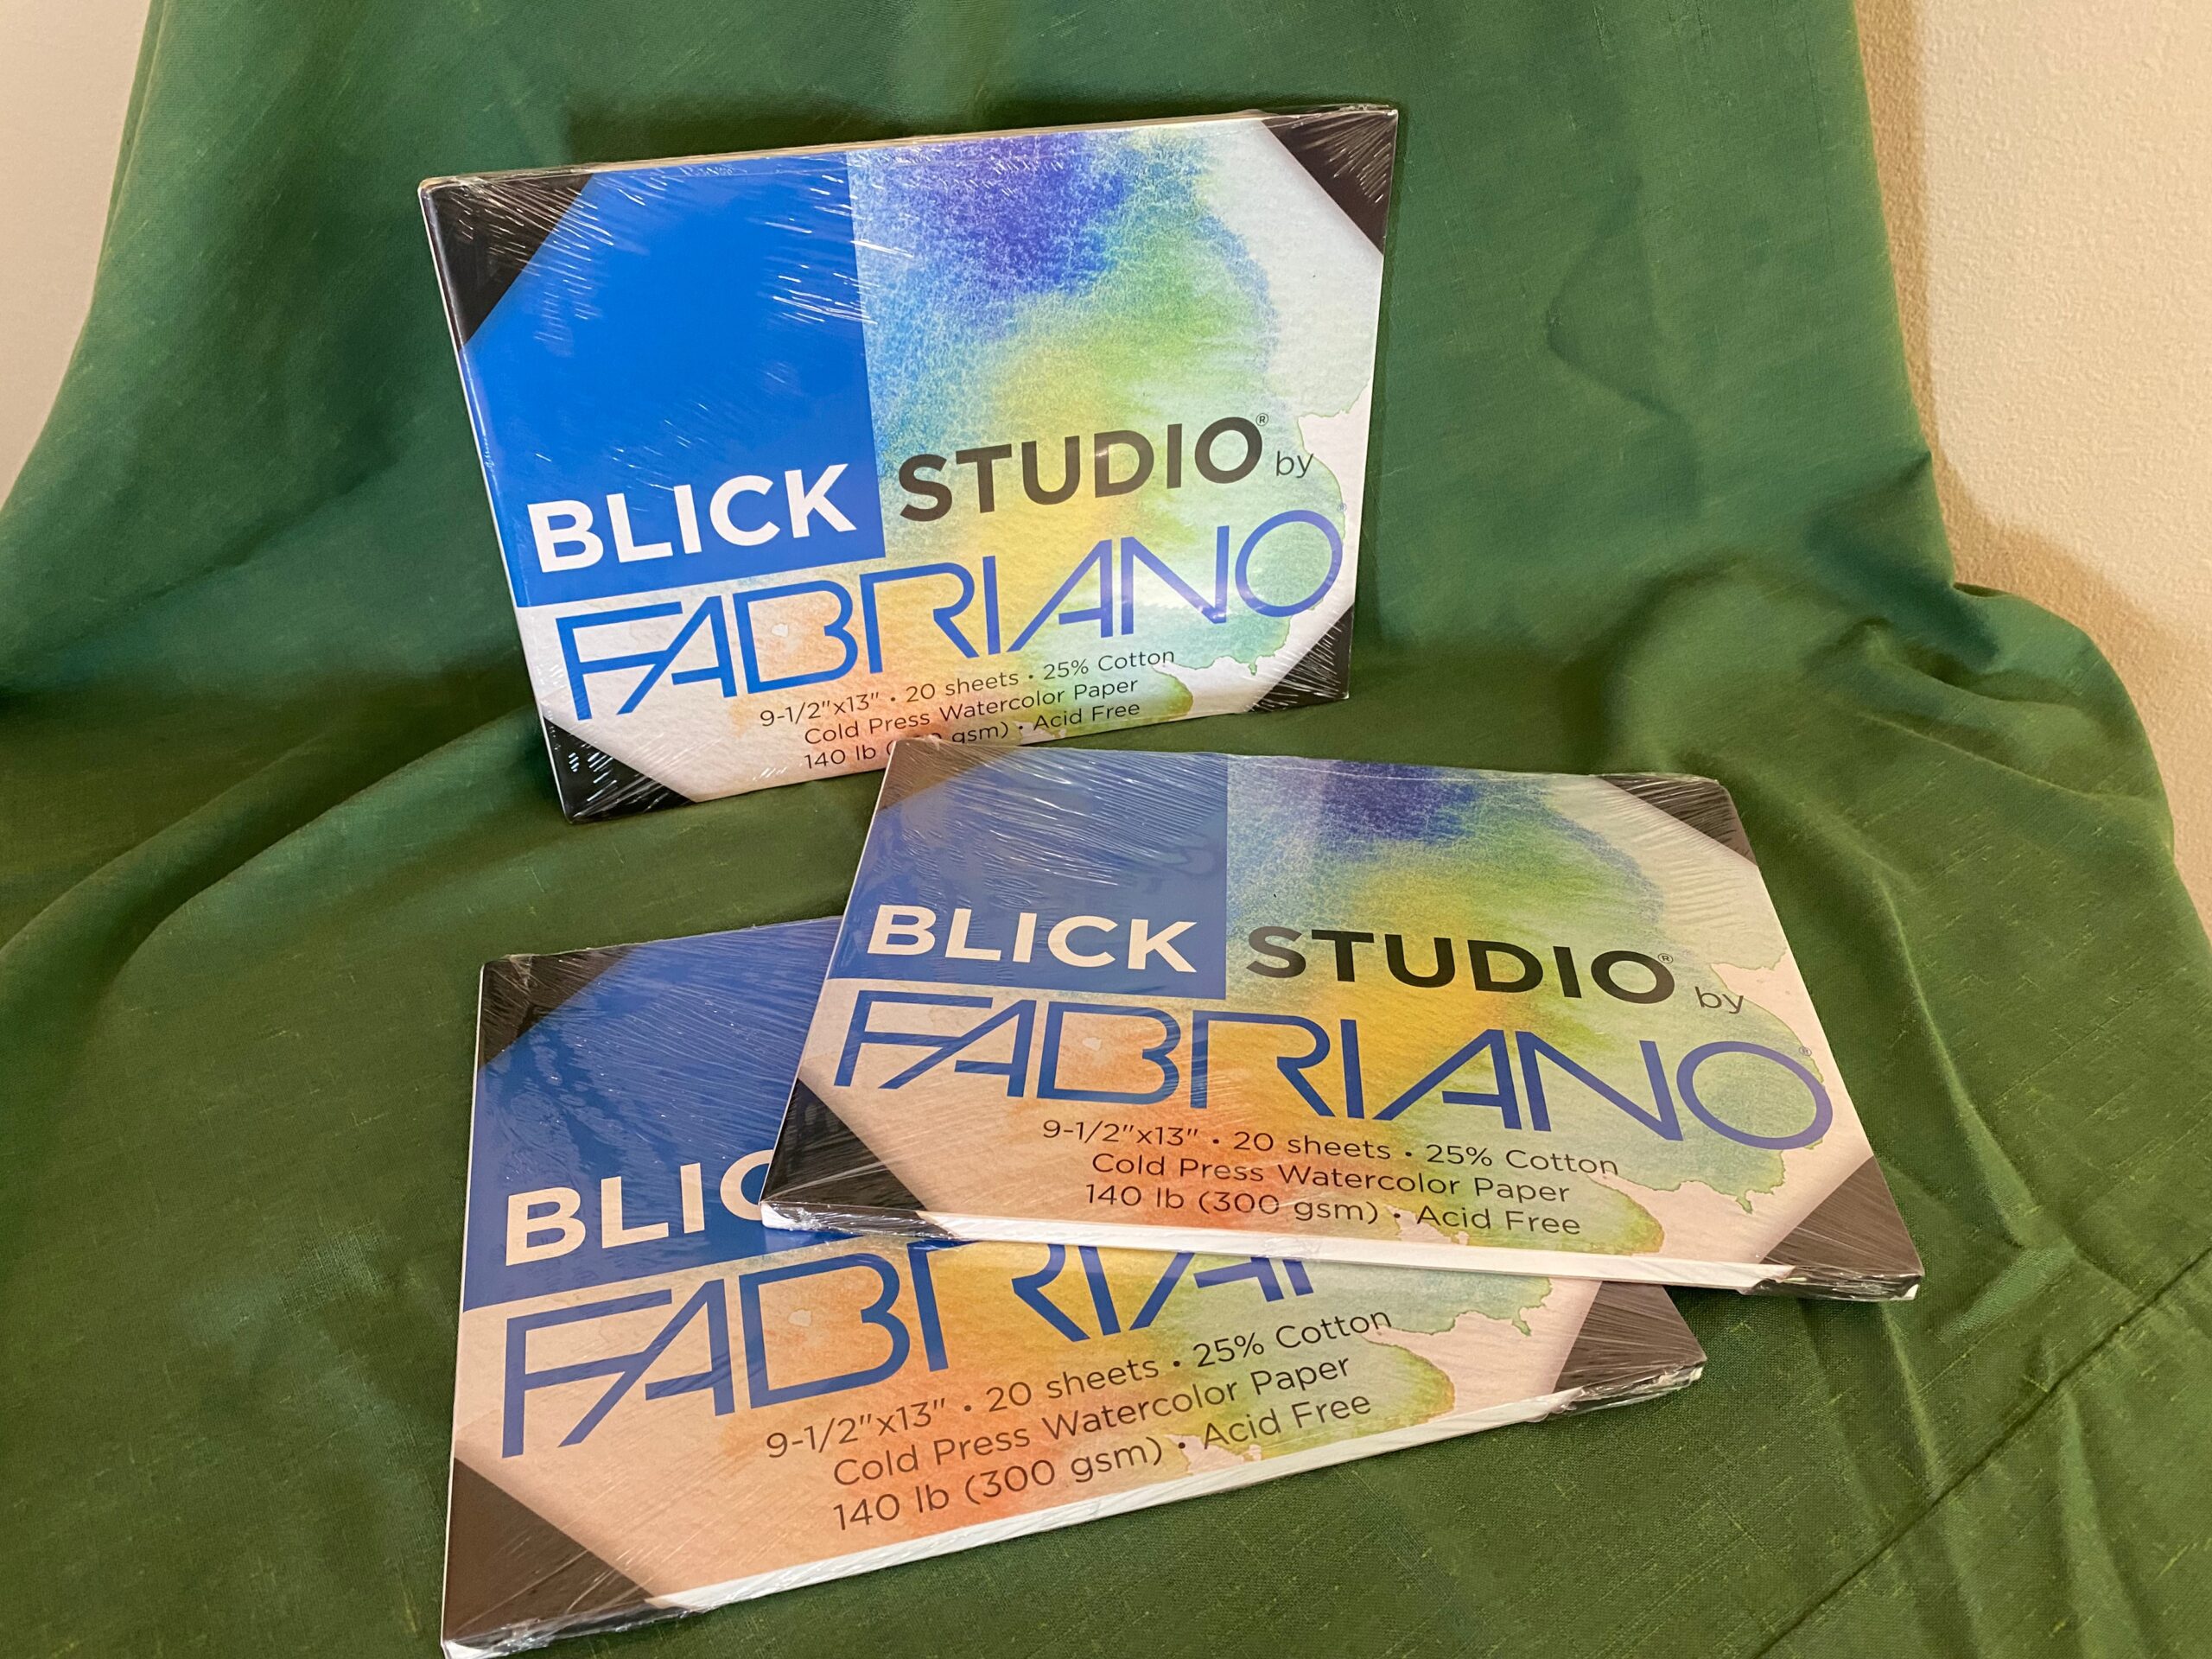 Blick Studio by Fabriano WC Paper